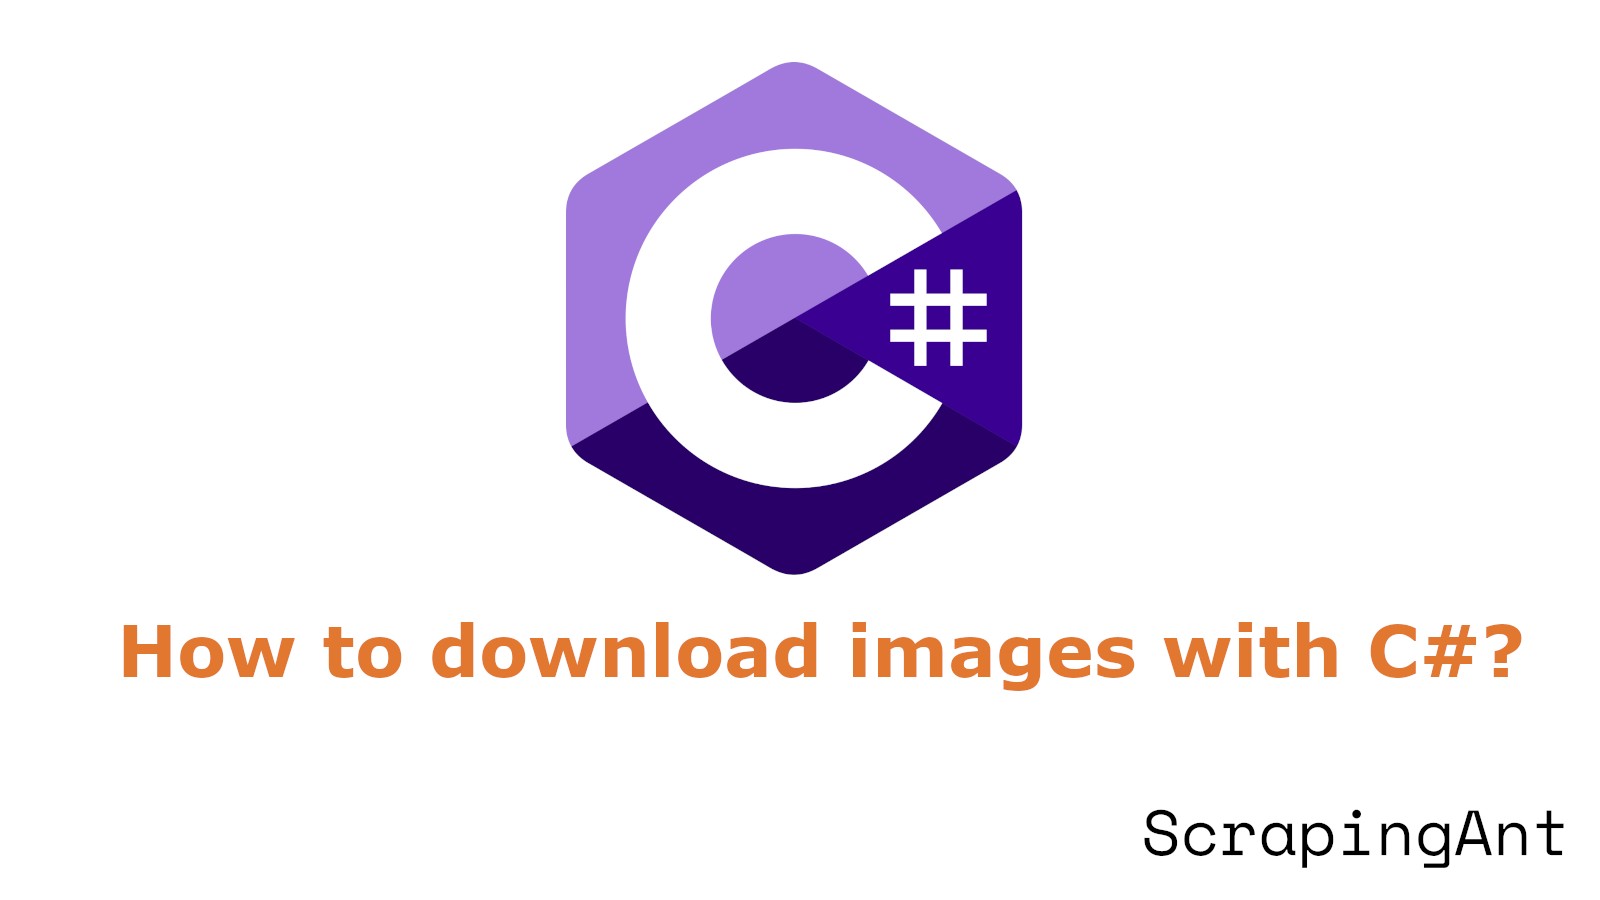 How to download images with C#?